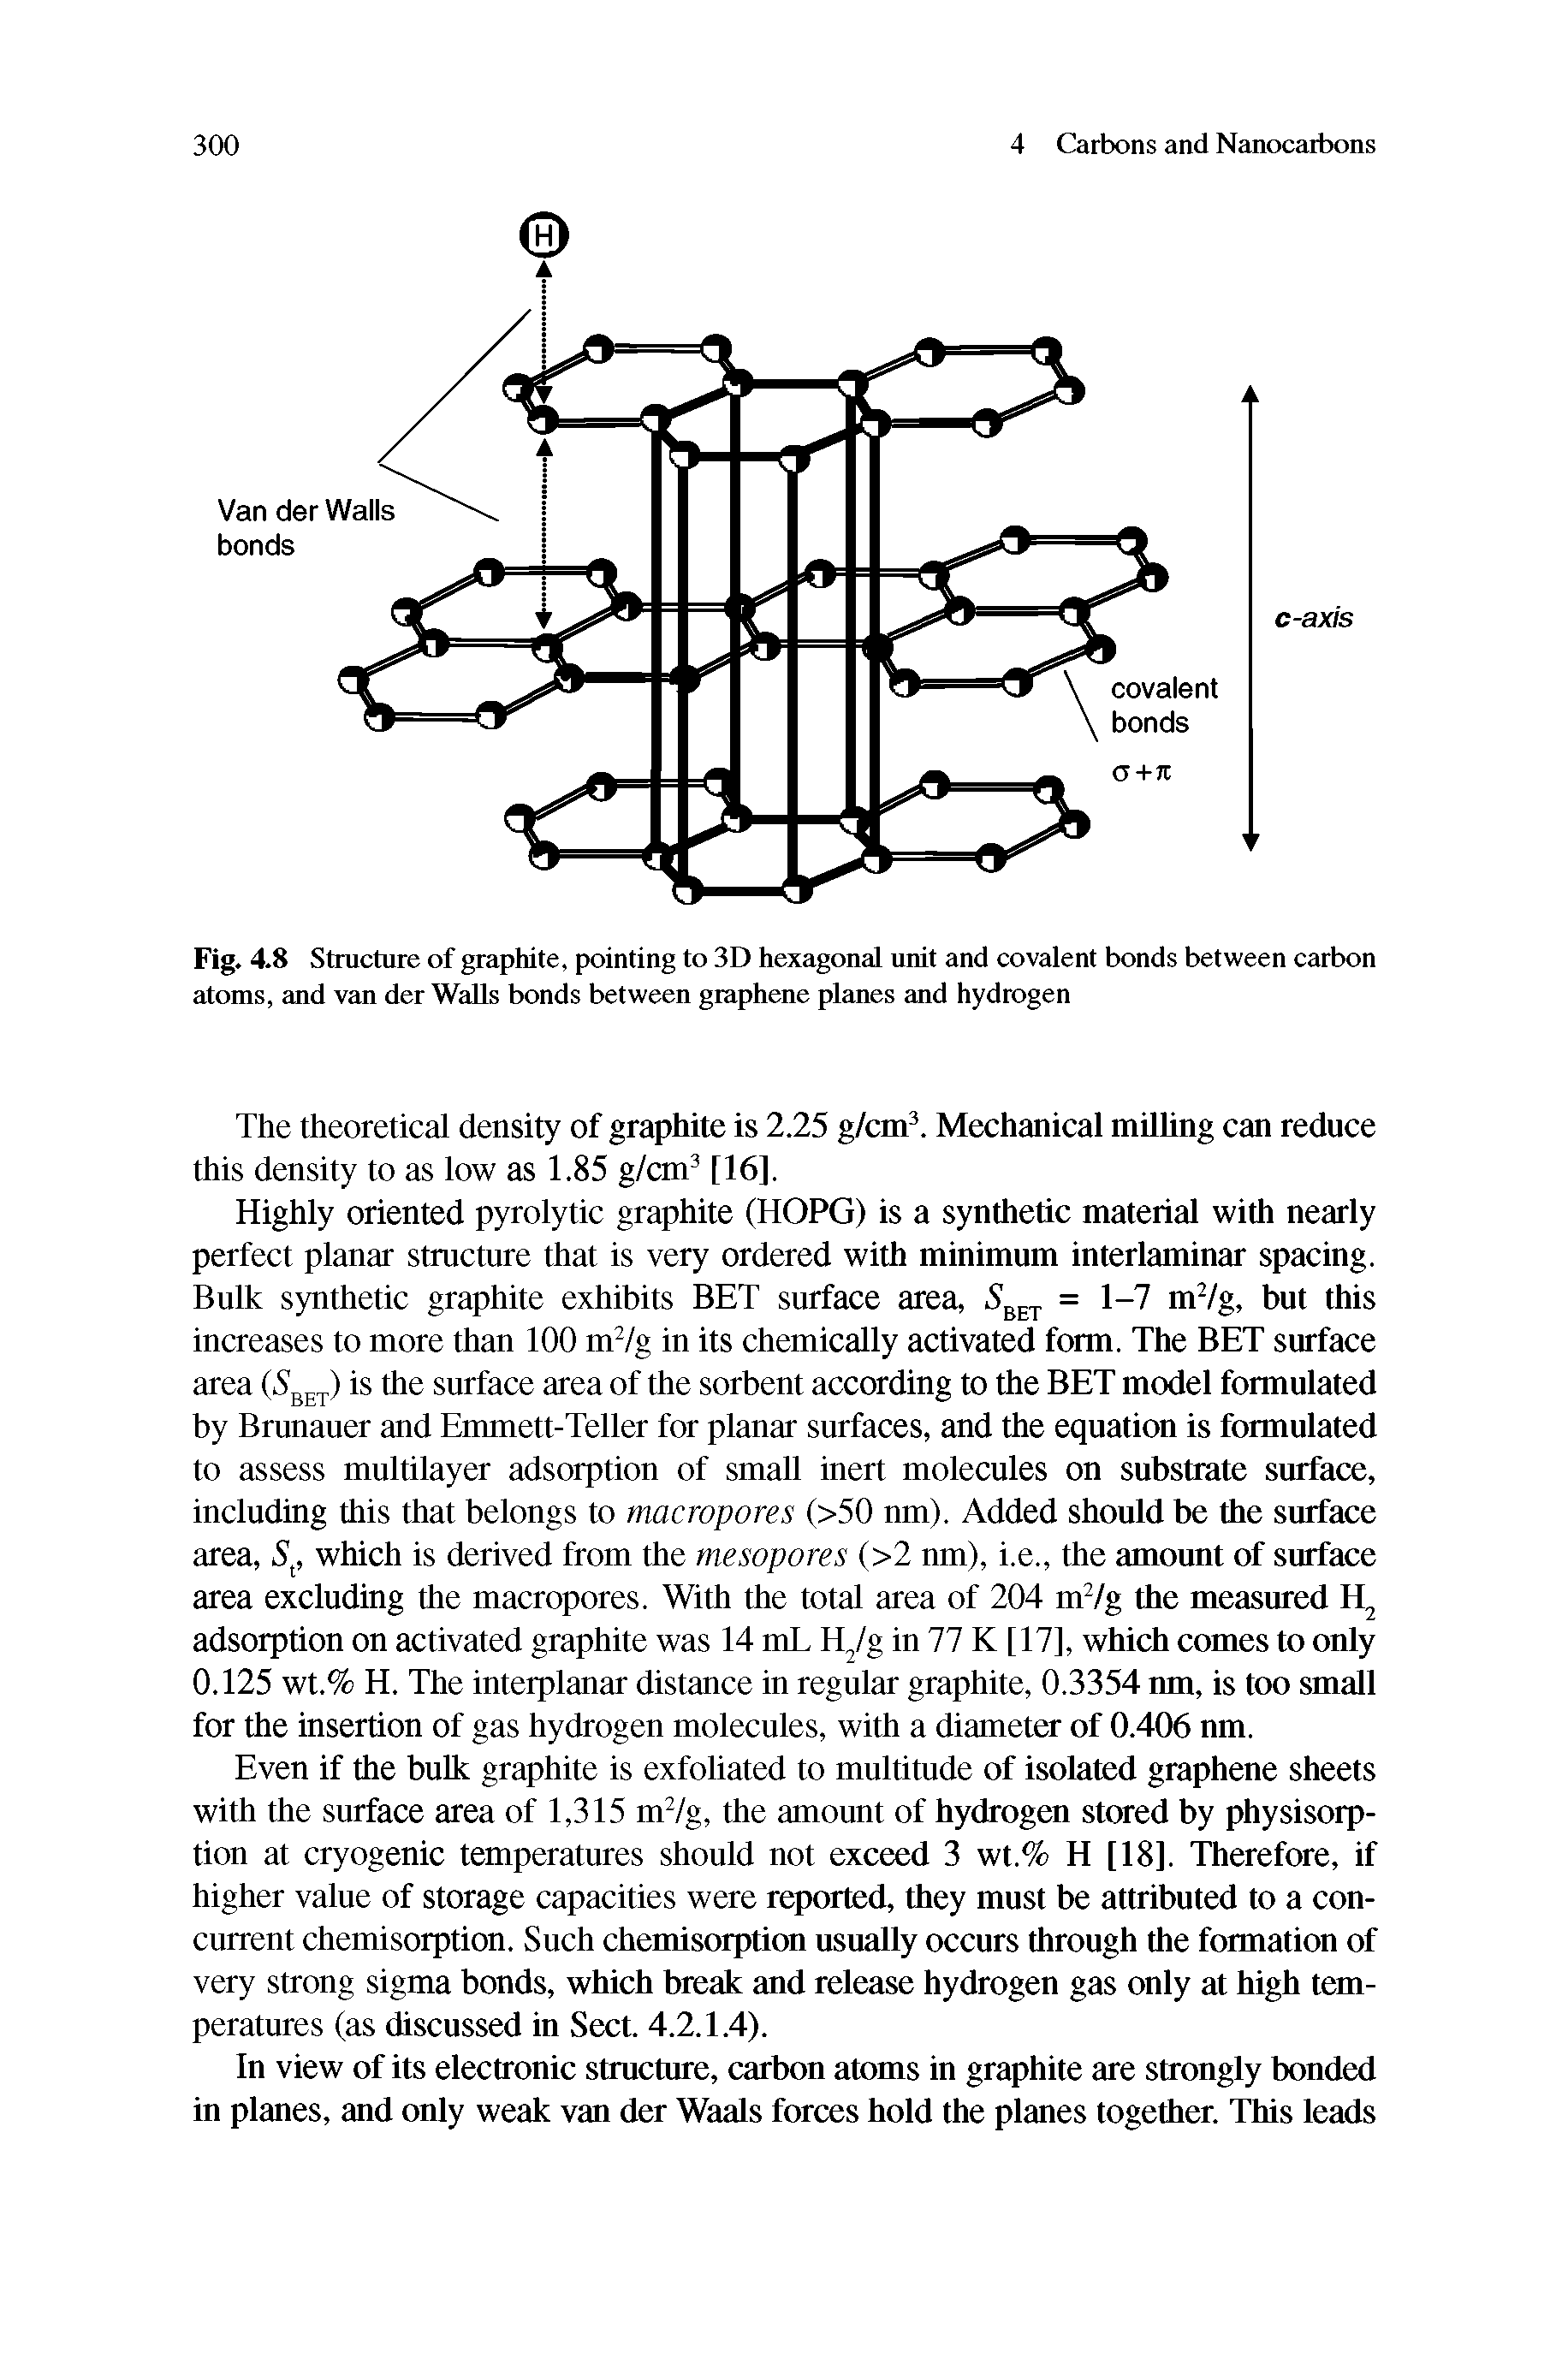 Fig. 4.8 Structure of graphite, pointing to 3D hexagonal unit and covalent bonds between carbon atoms, and van der Walls bonds between graphene planes and hydrogen...